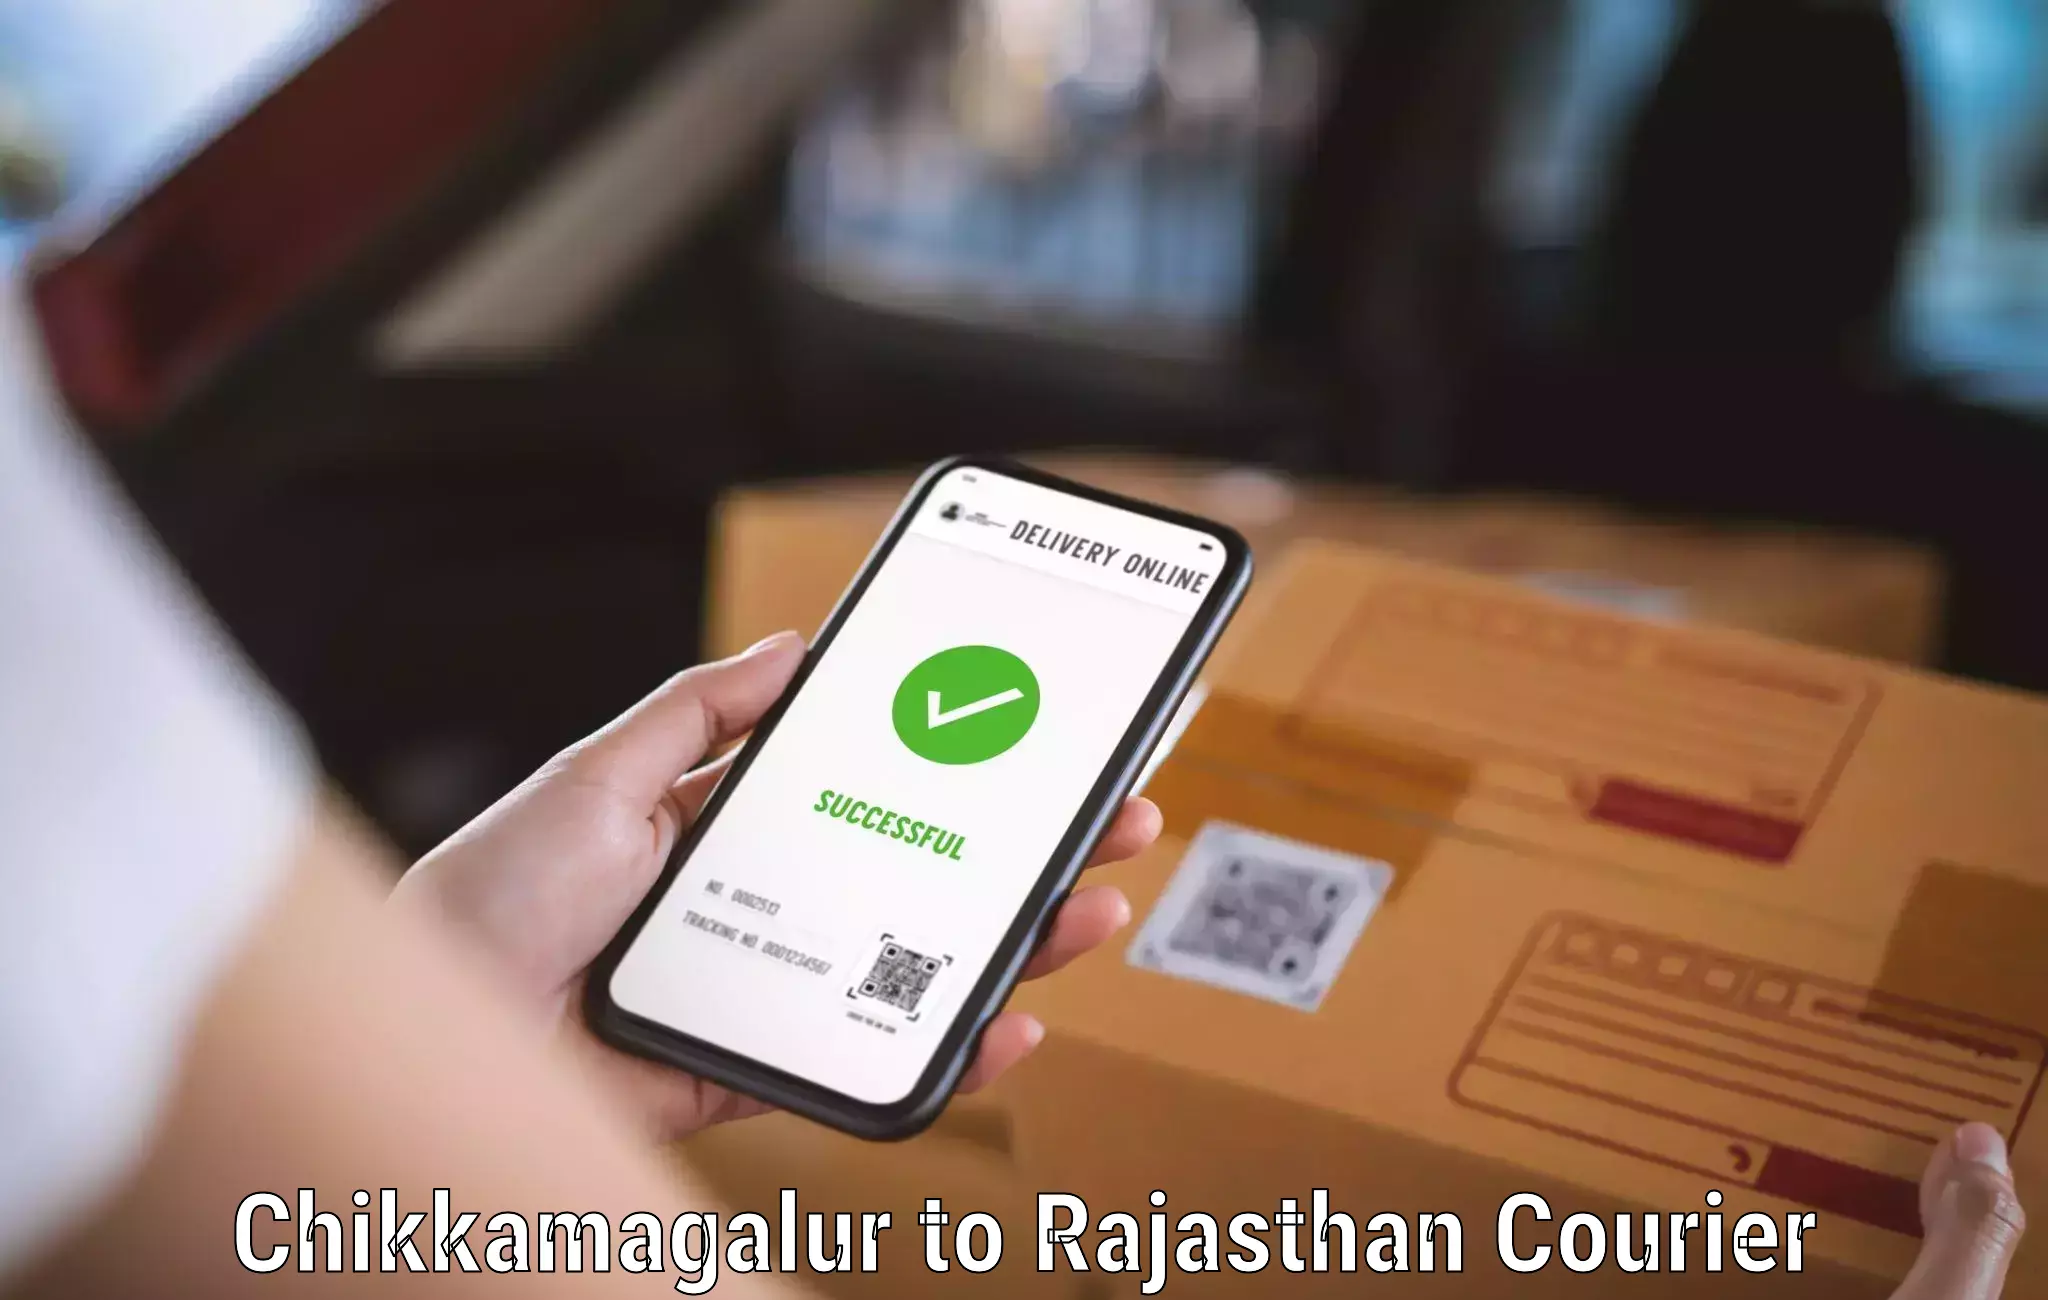 State-of-the-art courier technology Chikkamagalur to Nokha